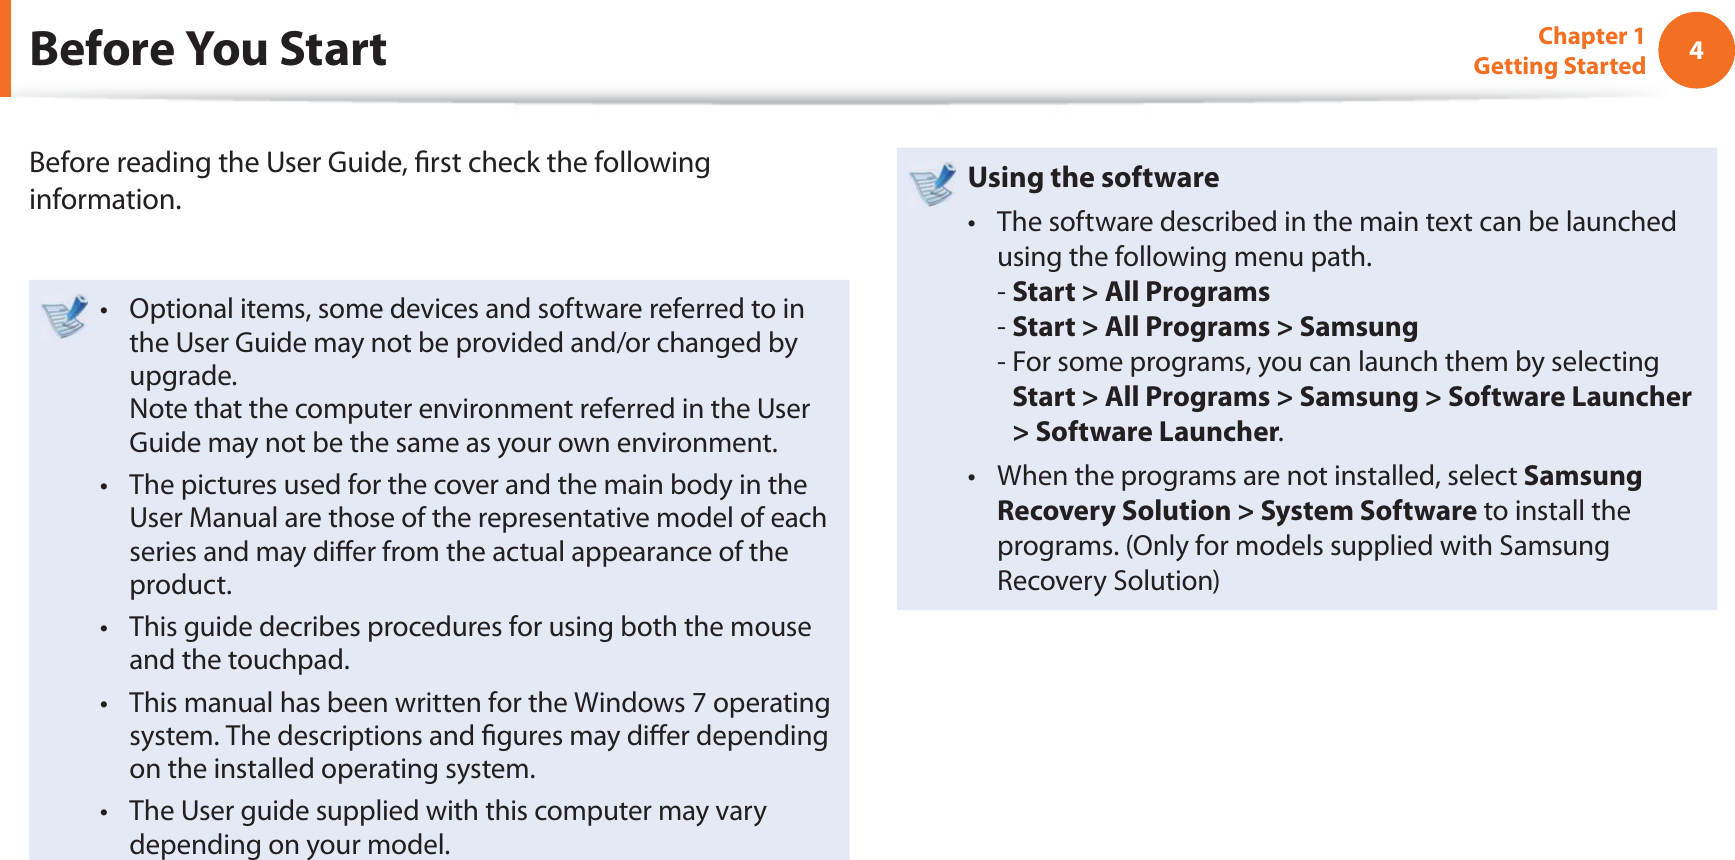 4Chapter 1 Getting StartedBefore You StartBefore reading the User Guide,  rst check the following information.Optional items, some devices and software referred to in t the User Guide may not be provided and/or changed by upgrade.Note that the computer environment referred in the User Guide may not be the same as your own environment. The pictures used for the cover and the main body in the t User Manual are those of the representative model of each series and may di er from the actual appearance of the product.This guide decribes procedures for using both the mouse t and the touchpad.This manual has been written for the Windows 7 operating t system. The descriptions and  gures may di er depending on the installed operating system.The User guide supplied with this computer may vary t depending on your model.Using the software The software described in the main text can be launched t using the following menu path. - Start &gt; All Programs- Start &gt; All Programs &gt; Samsung-  For some programs, you can launch them by selecting Start &gt; All Programs &gt; Samsung &gt; Software Launcher &gt; Software Launcher.When the programs are not installed, select t Samsung Recovery Solution &gt; System Software to install the programs. (Only for models supplied with Samsung Recovery Solution)